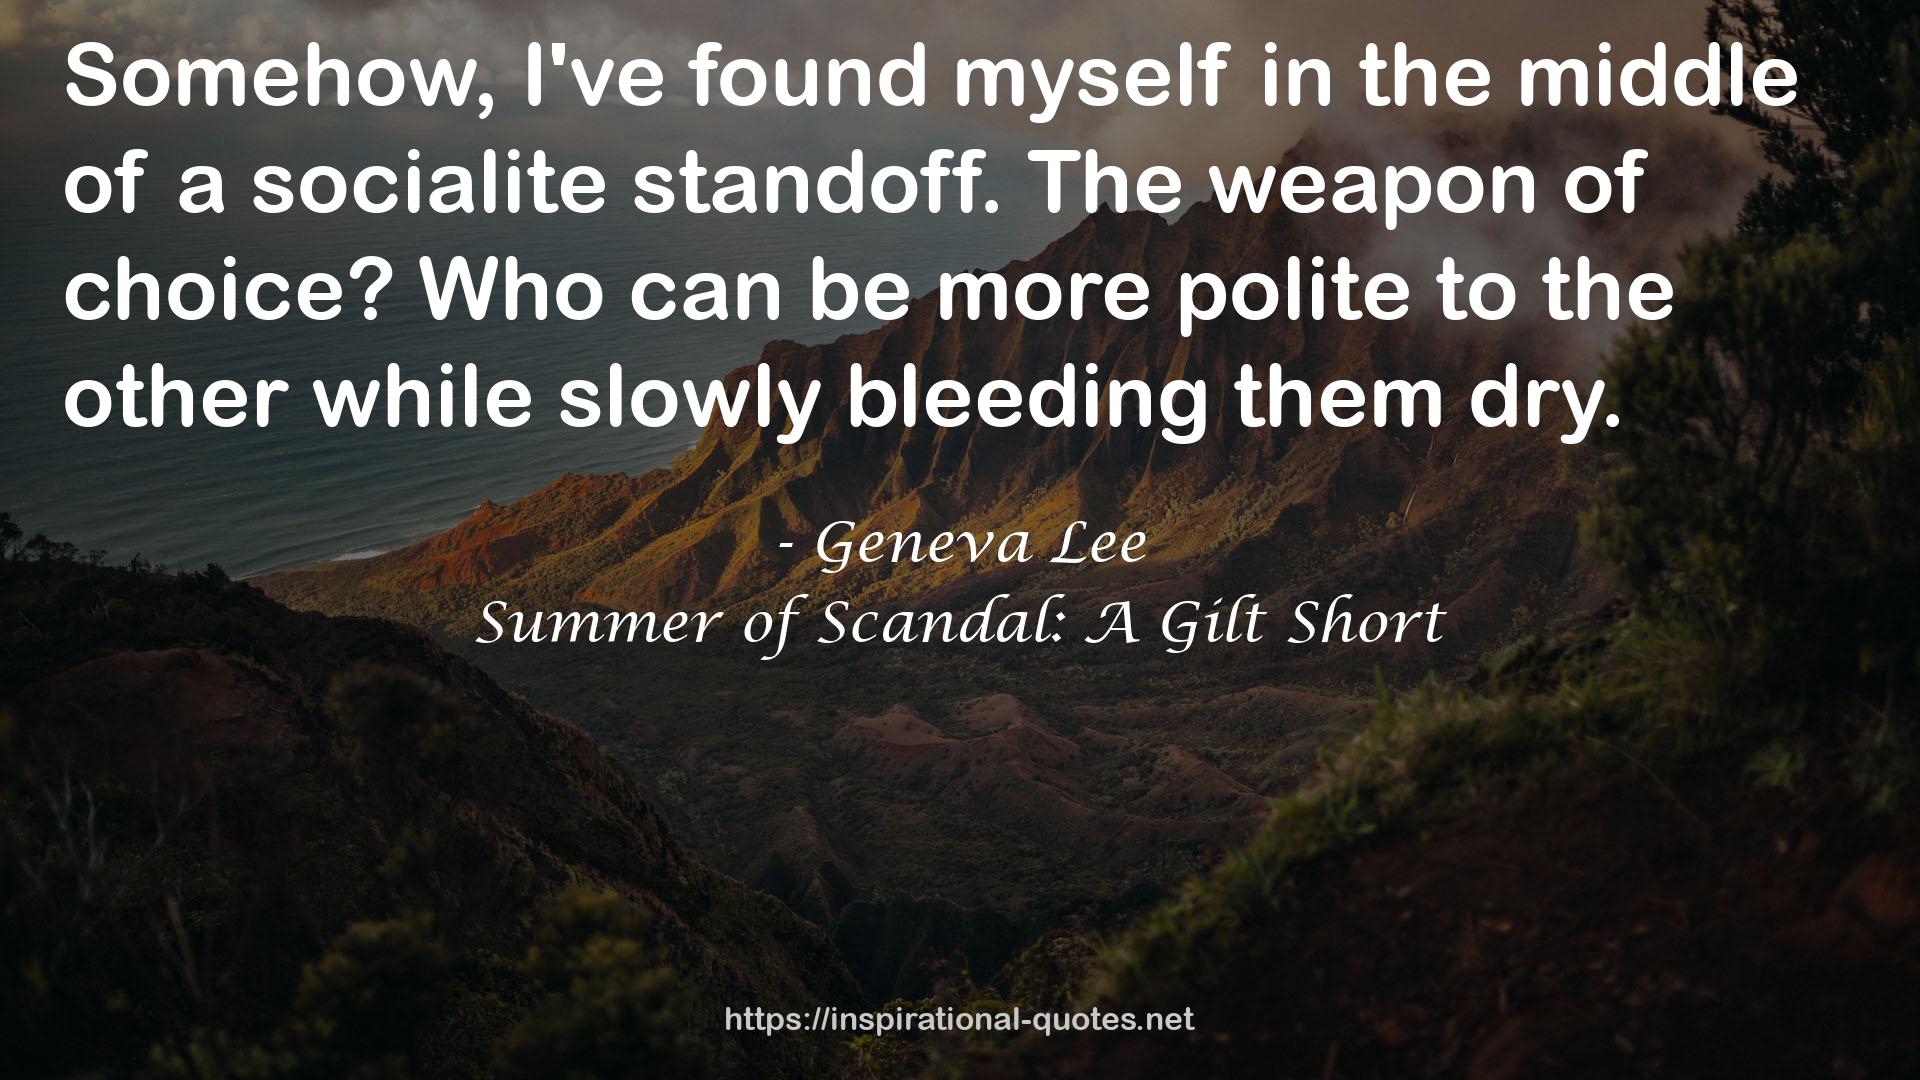 Summer of Scandal: A Gilt Short QUOTES